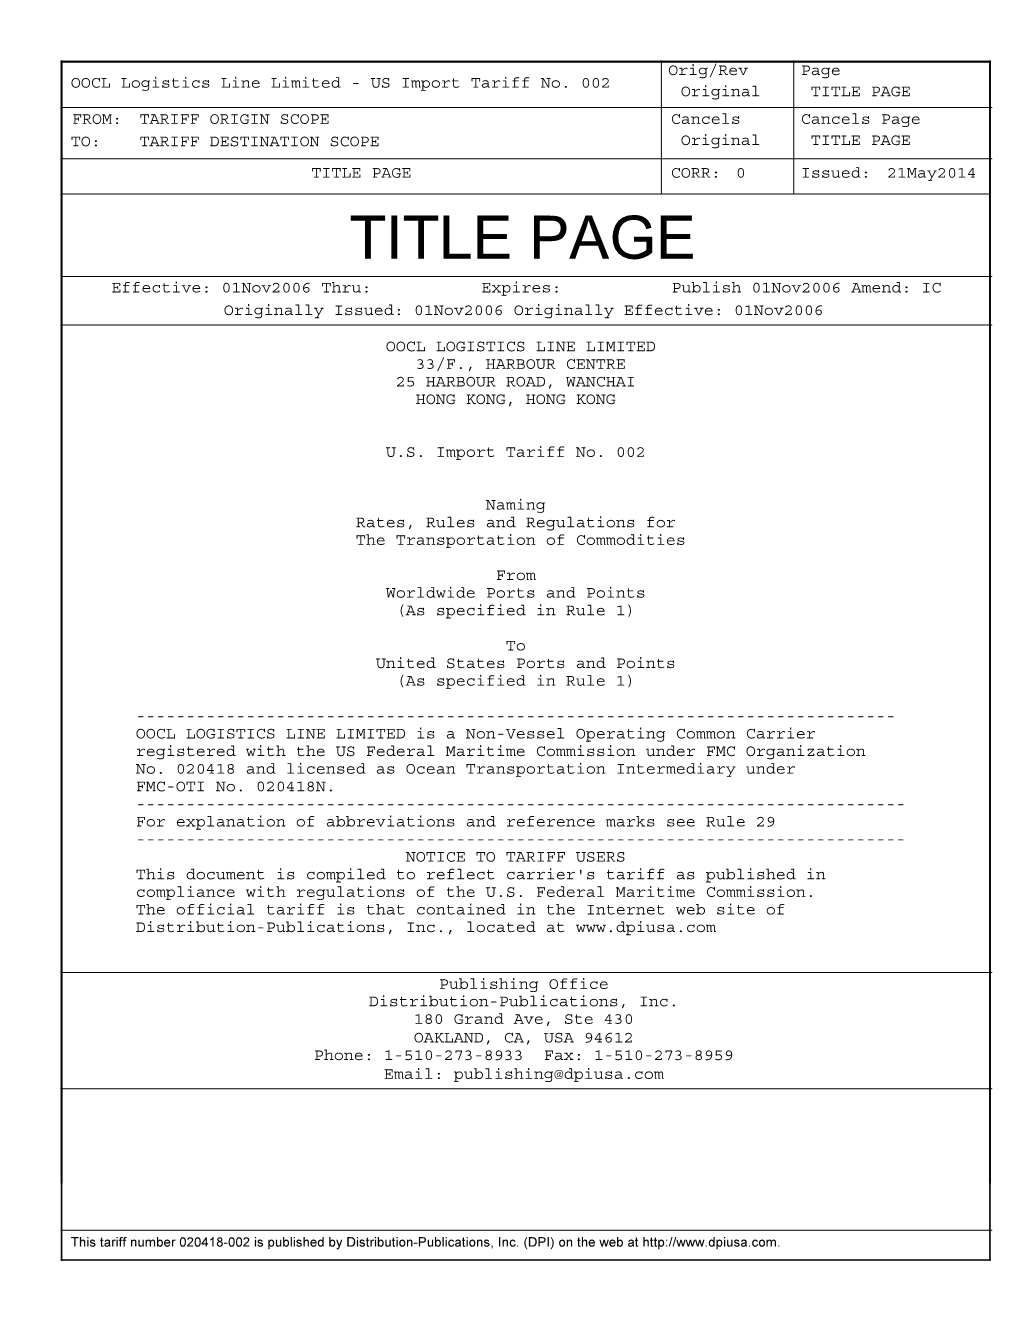 TITLE PAGE FROM: TARIFF ORIGIN SCOPE Cancels Cancels Page TO: TARIFF DESTINATION SCOPE Original TITLE PAGE TITLE PAGE CORR: 0 Issued: 21May2014 TITLE PAGE